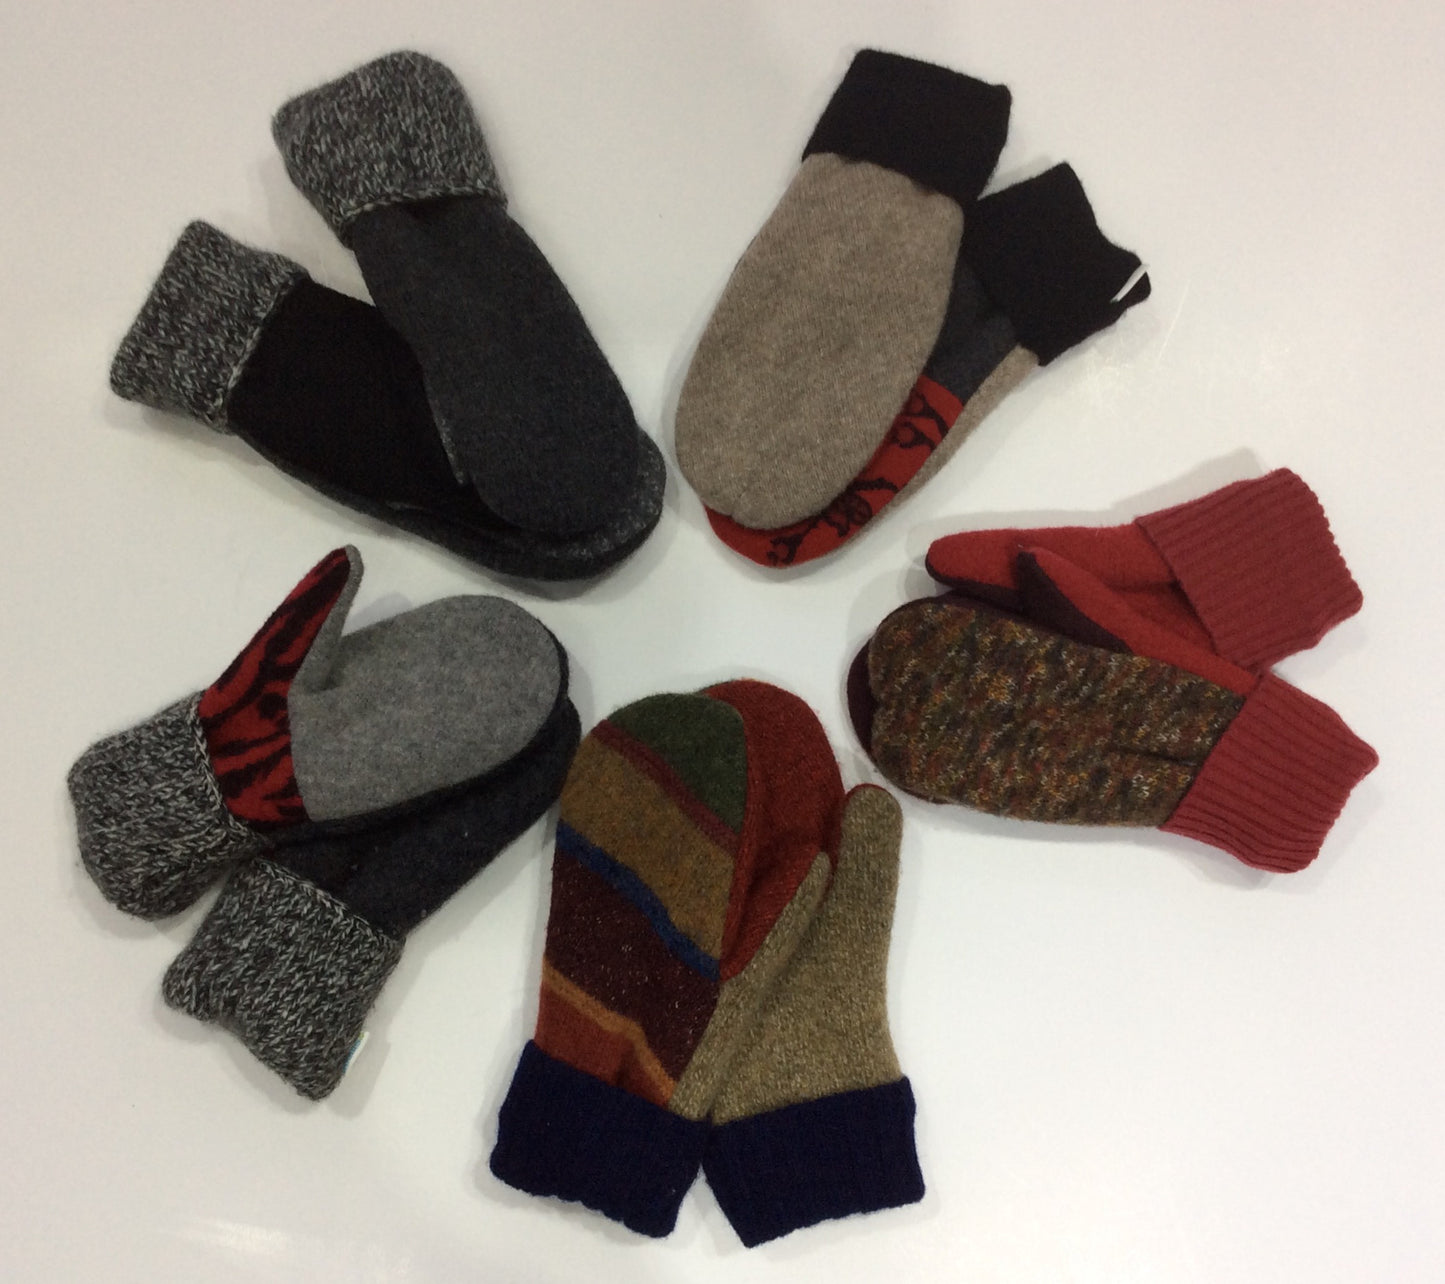 Wool Mittens Handcrafted from Reclaimed Sweaters